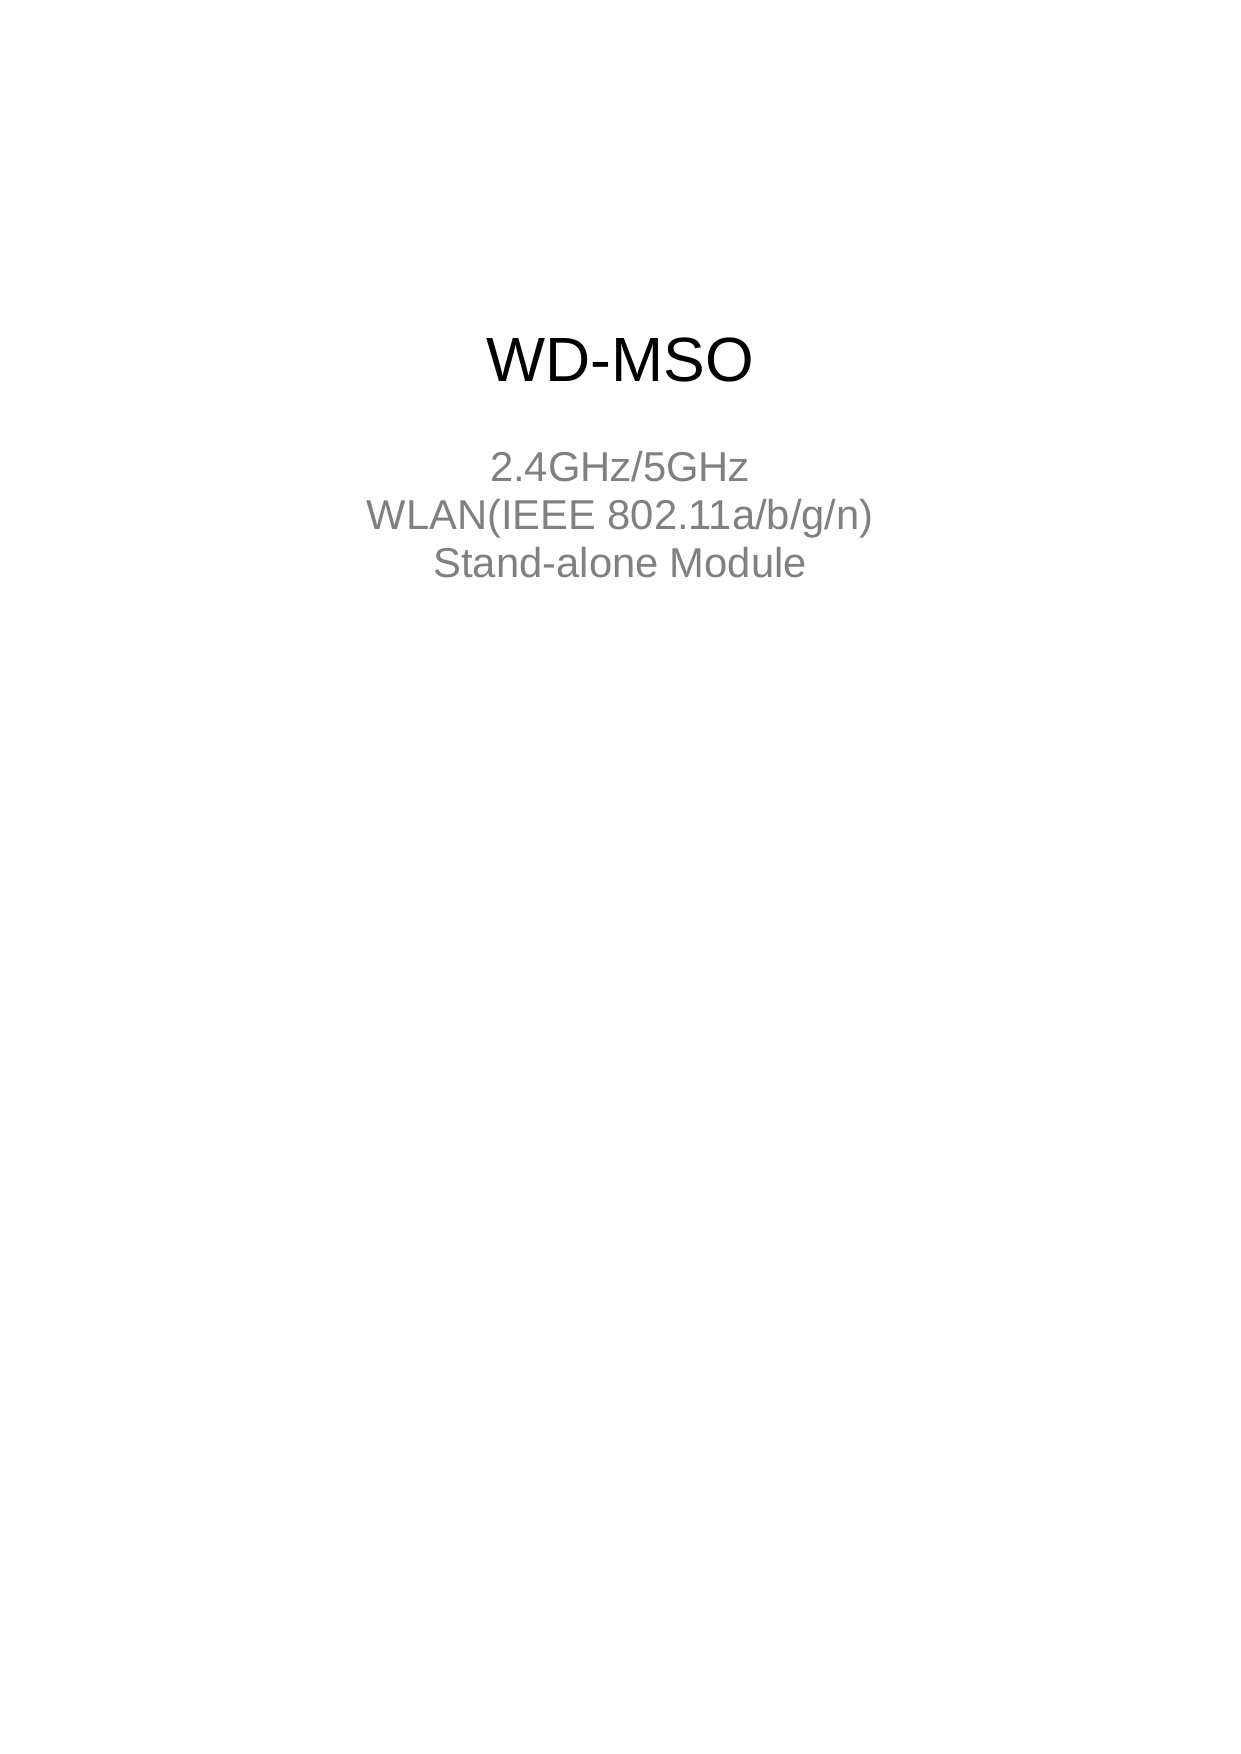     WD-MSO  2.4GHz/5GHz   WLAN(IEEE 802.11a/b/g/n)   Stand-alone Module                           